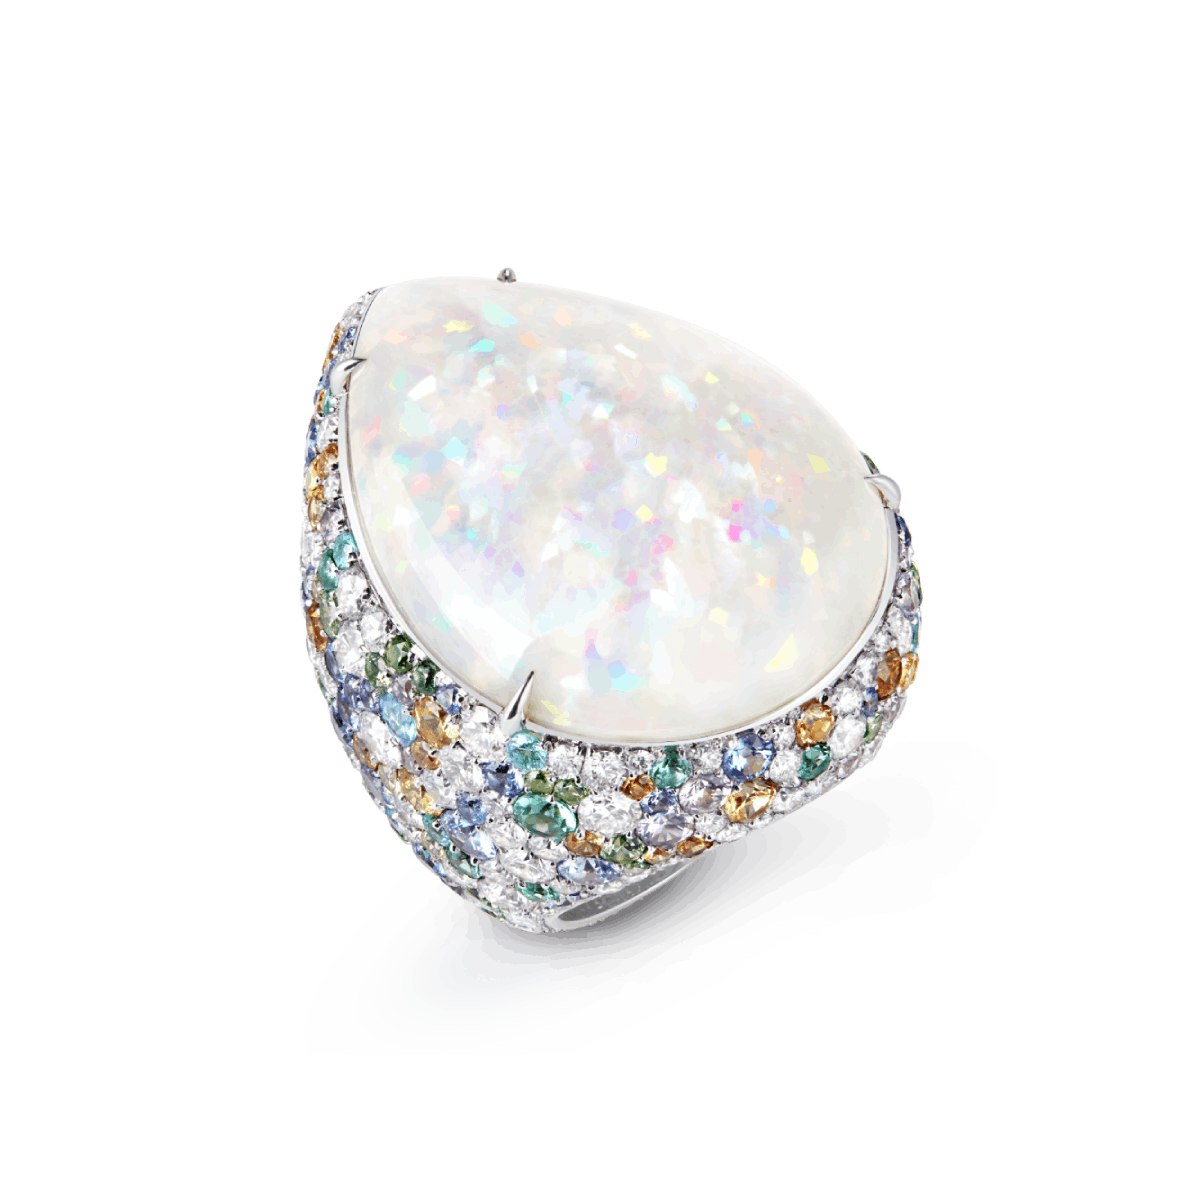 ILLUSION - Ring set with a 50.95 ct pear cabochon white opal from Ethiopia, blue, yellow and pink sapphires, tsavorites, orange and green garnets, emeralds, blue tourmalines and diamonds, in white gold.